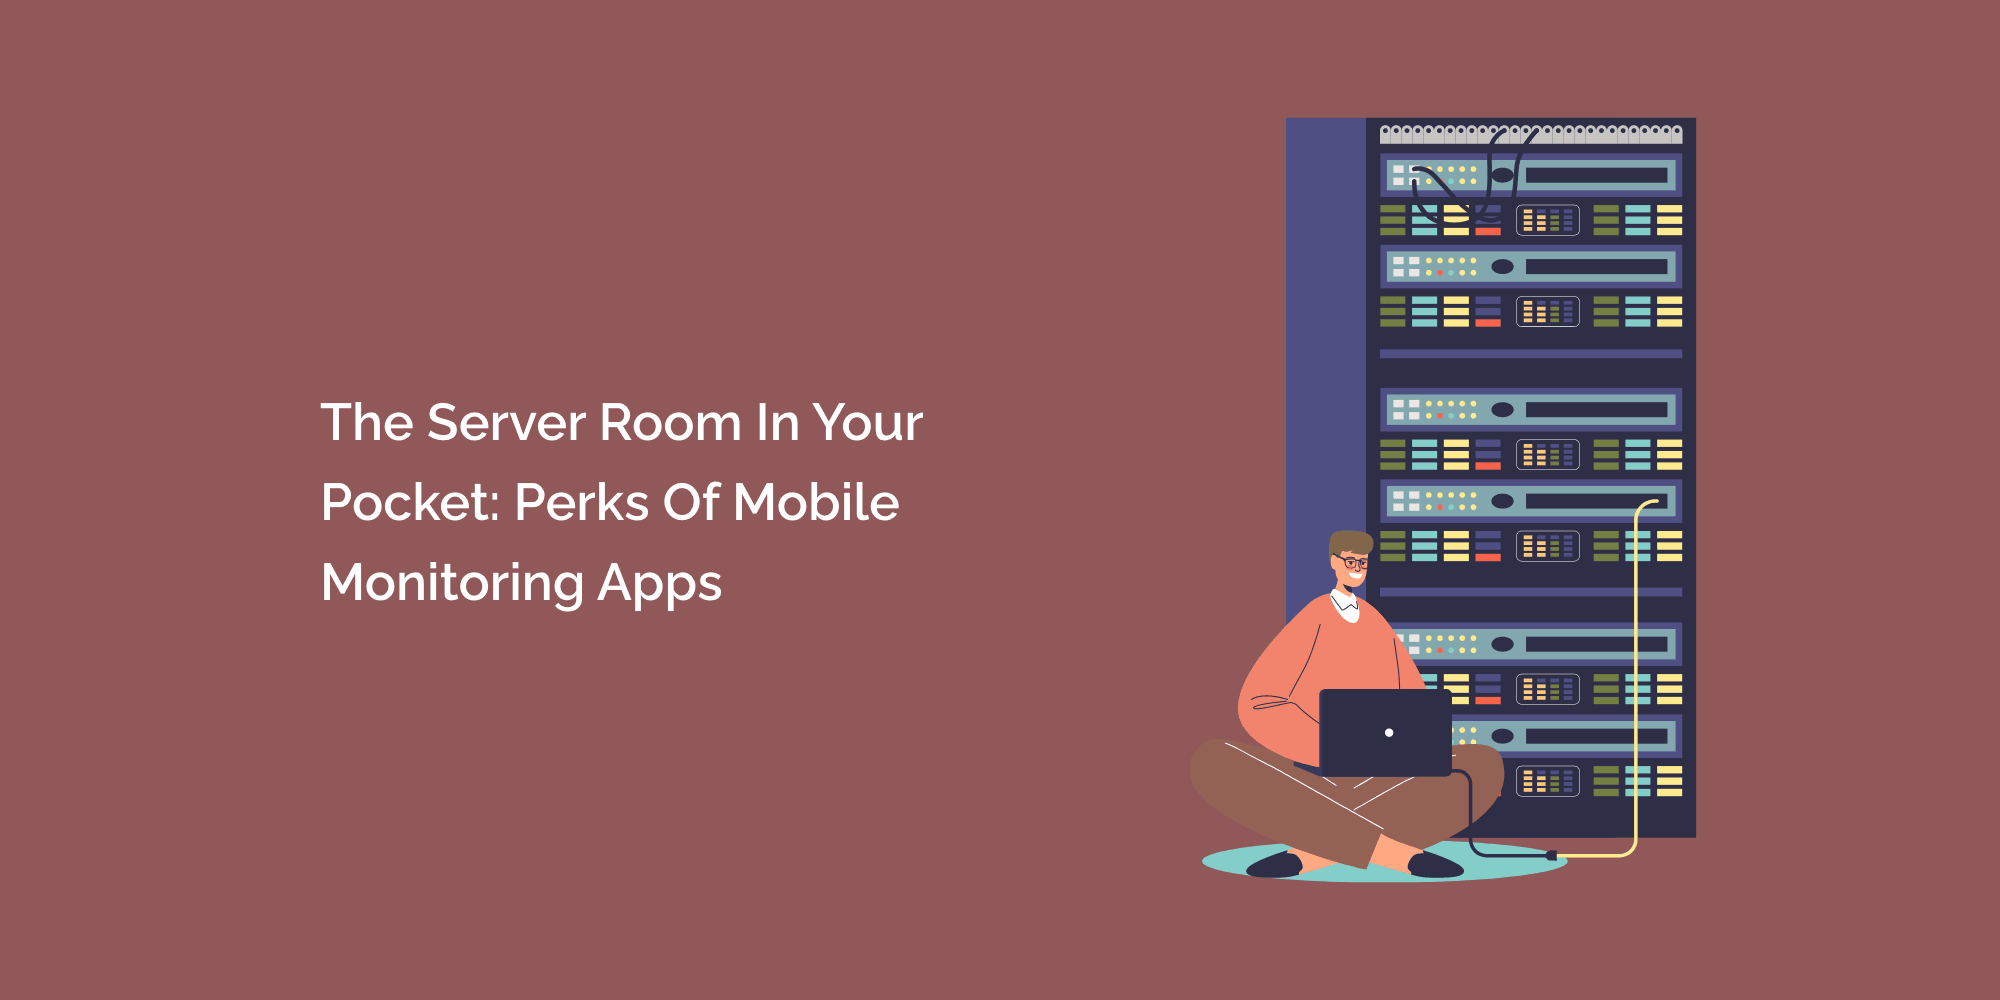 The Server Room in Your Pocket: Perks of Mobile Monitoring Apps